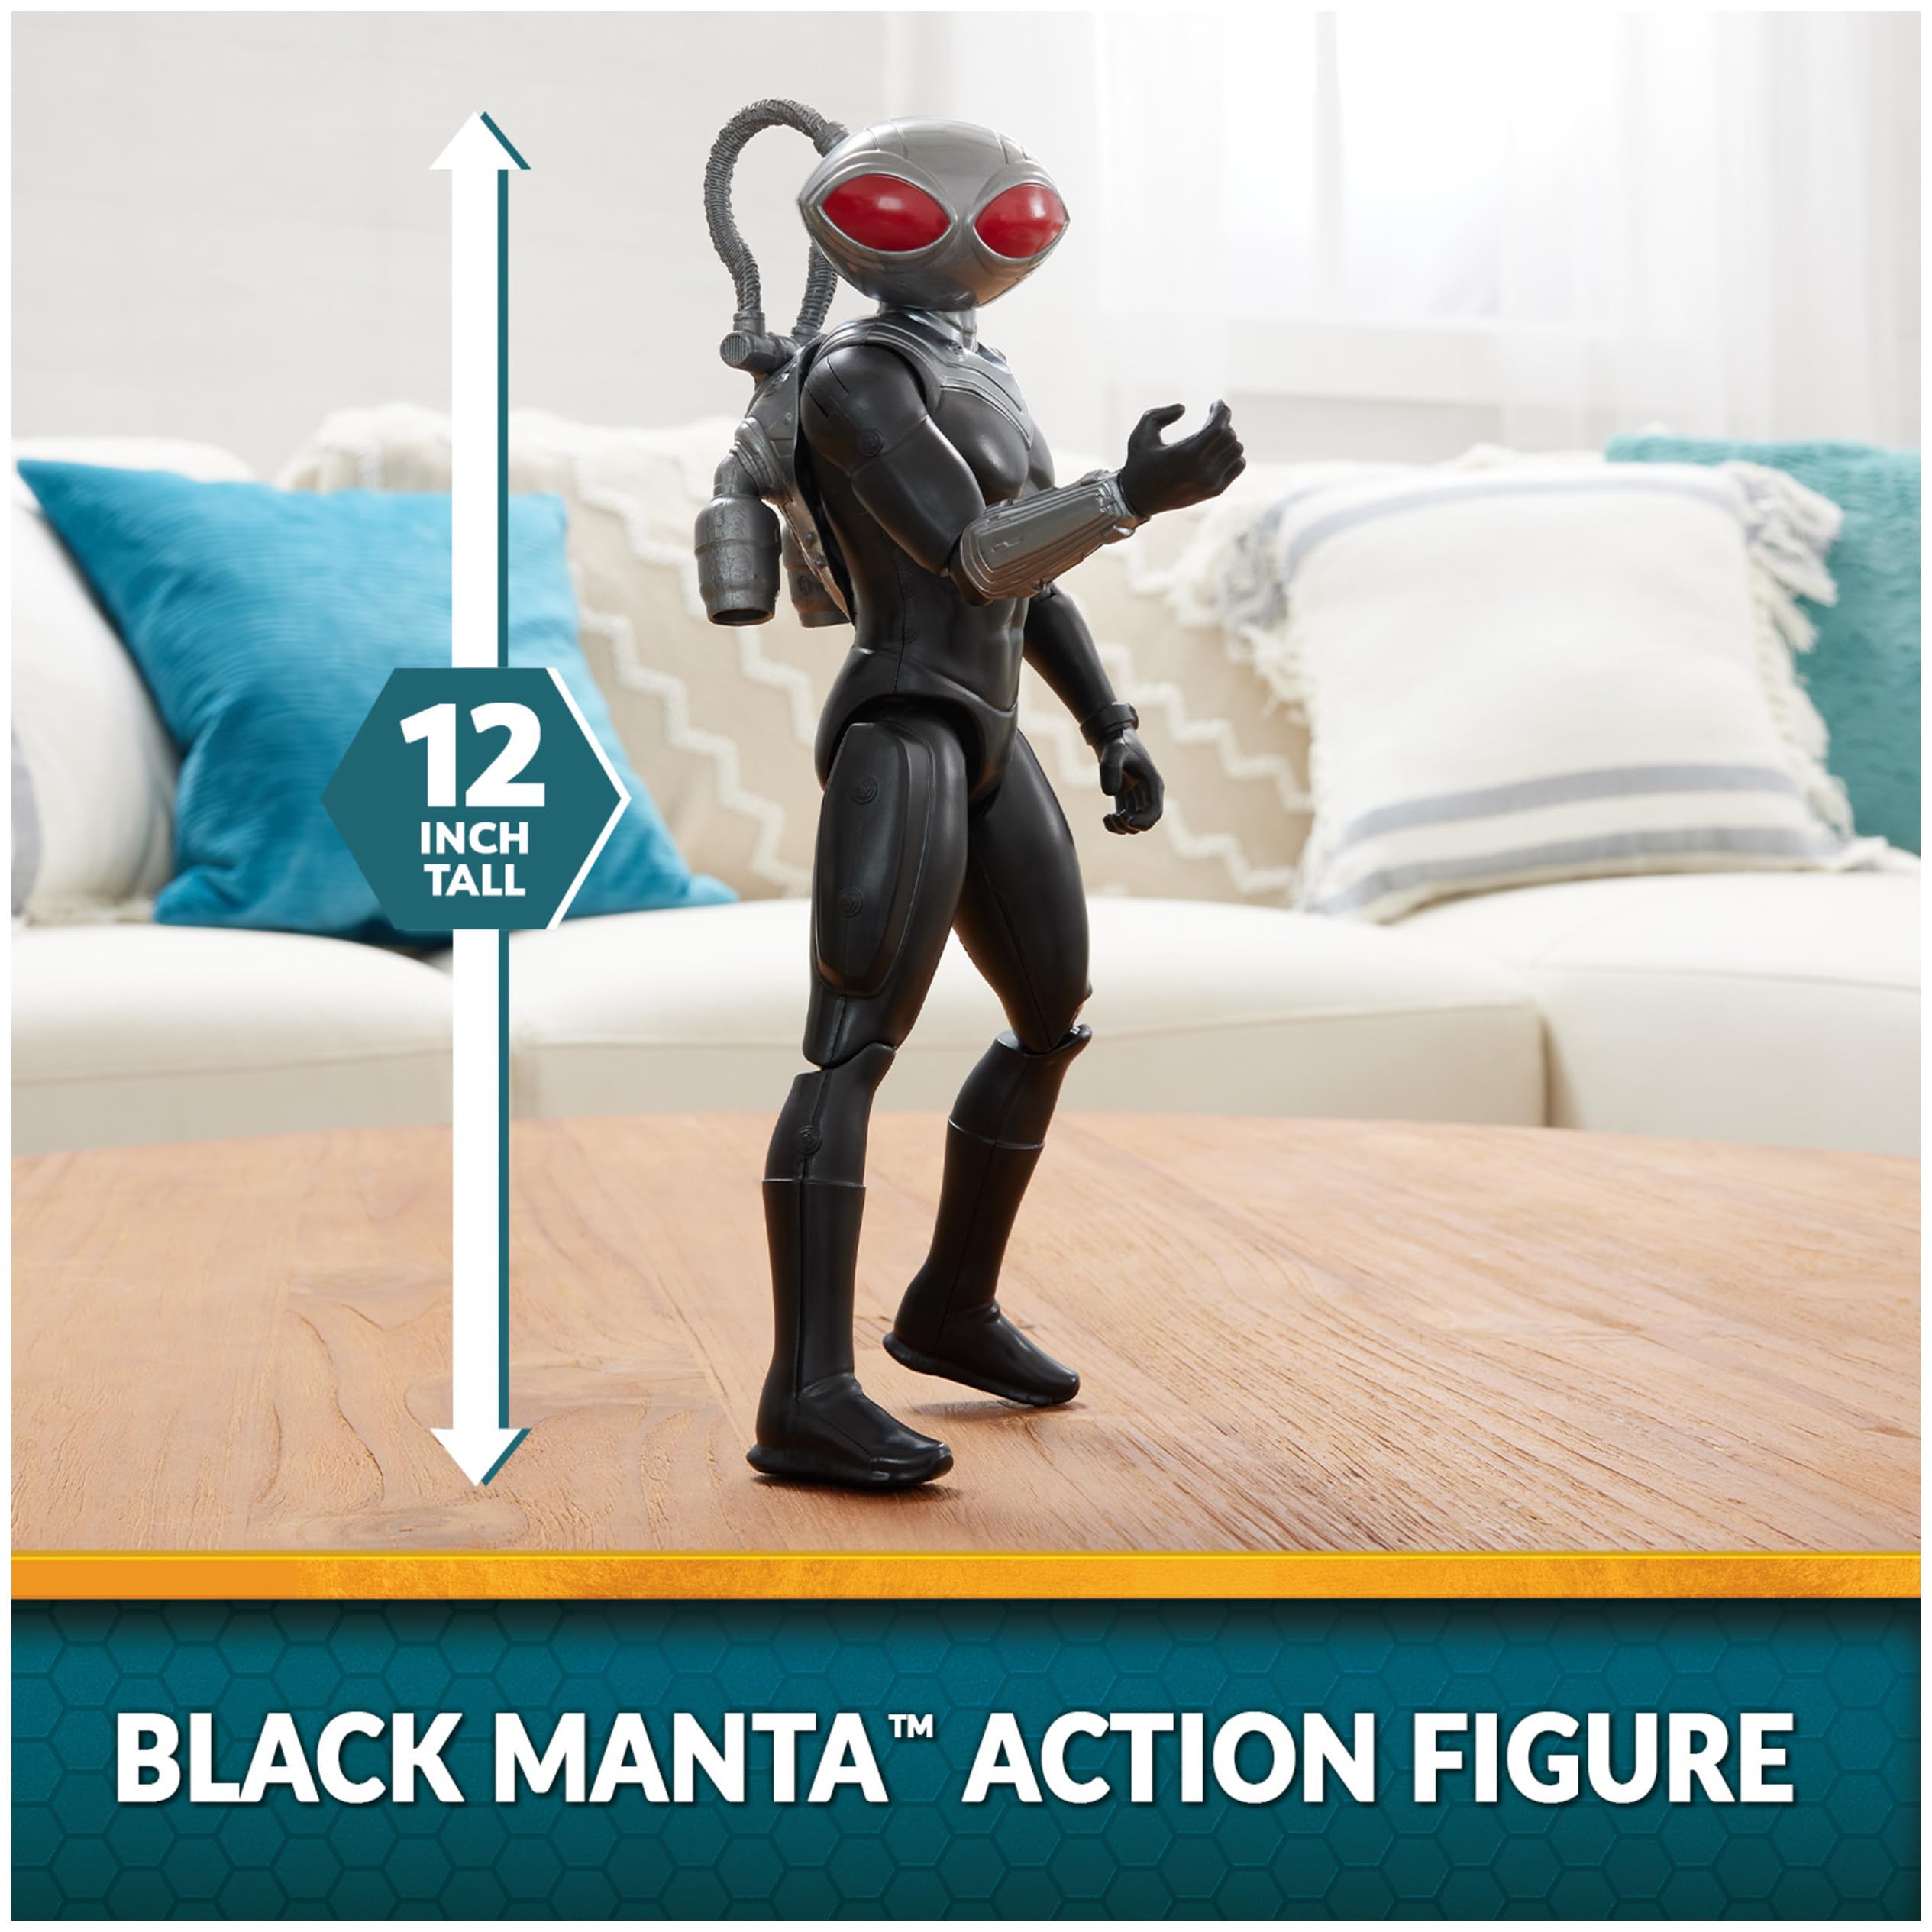 DC Comics, Aquaman, Black Manta Action Figure, 12-inch, Detailed Sculpting, Movie Styling, Easy to Pose, Collectible Superhero Kids Toys for Boys 3+